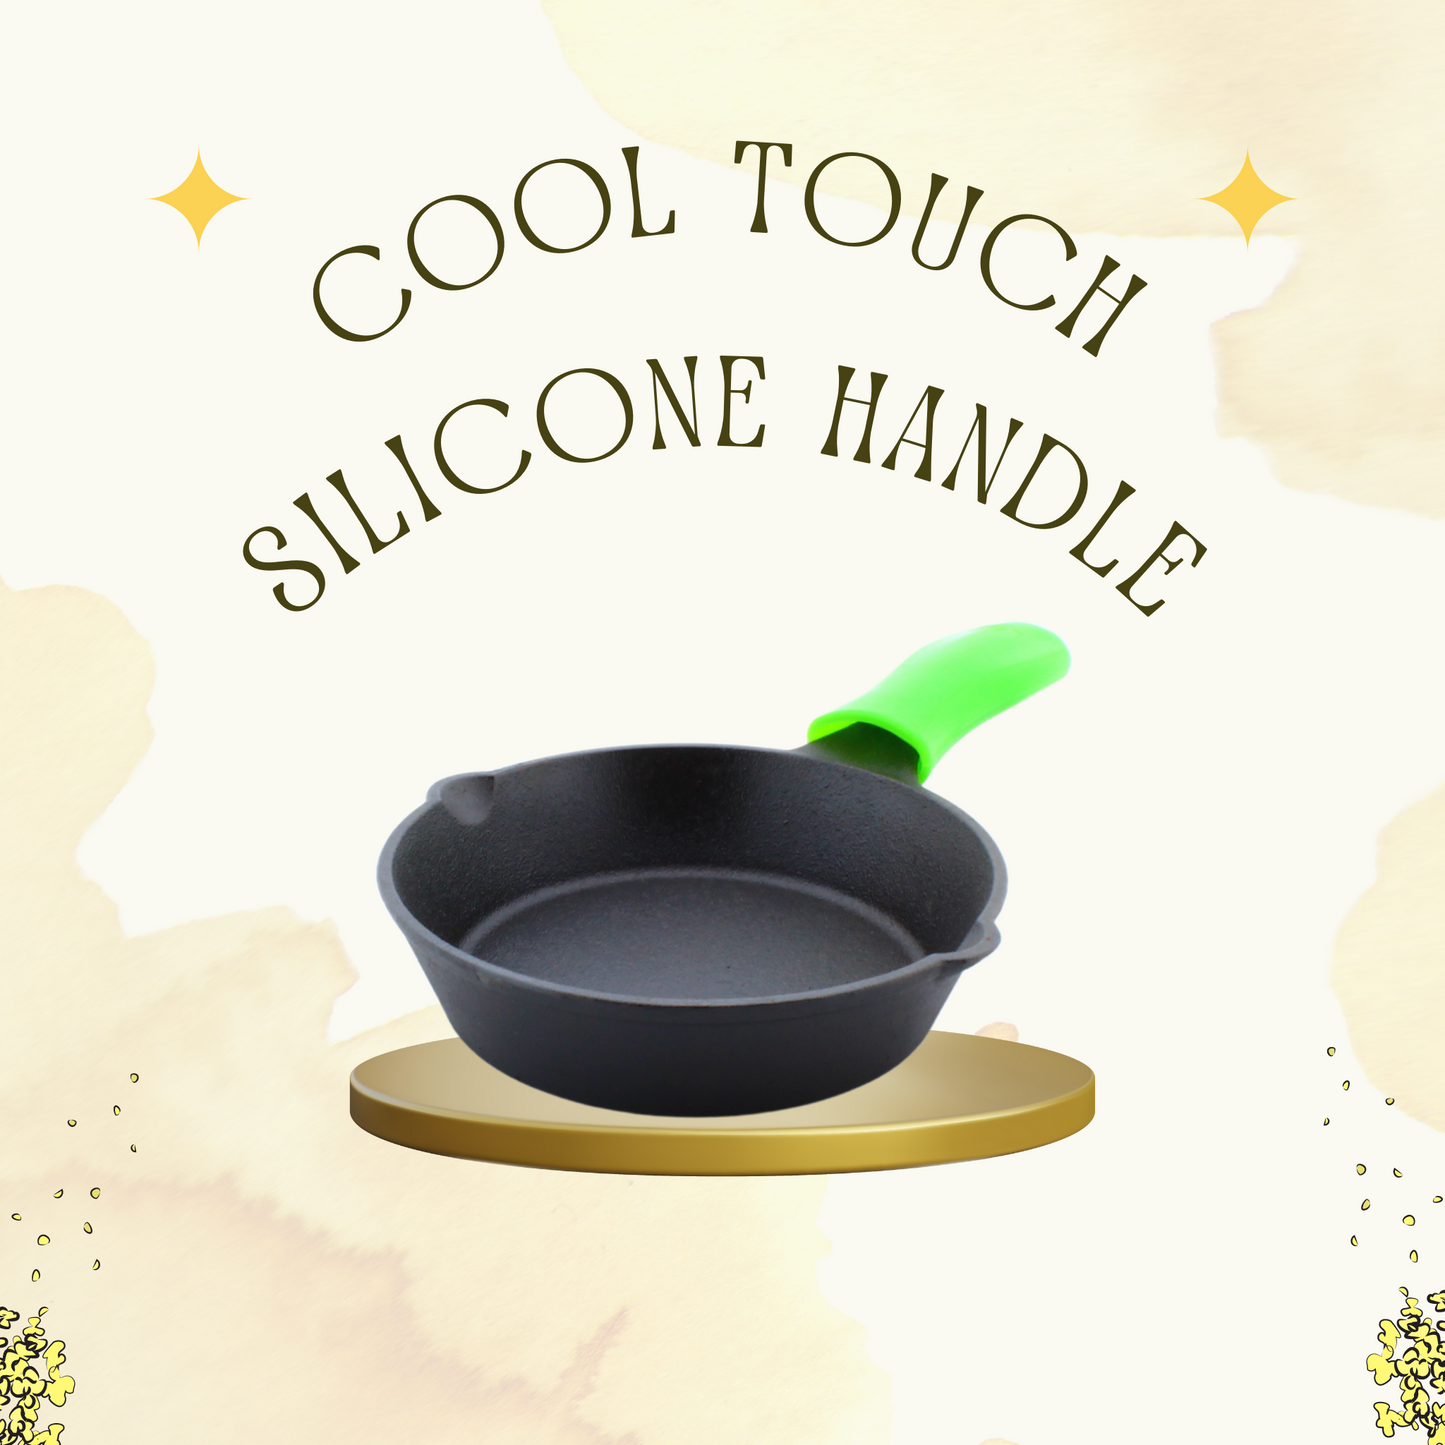 Cast Iron Skillet | Fry Pan | Pre-Seasoned | 8 inches | 1.45 Kgs | Induction Compatible | Free Silicone Heat Proof Sleeve Grip for hot handles